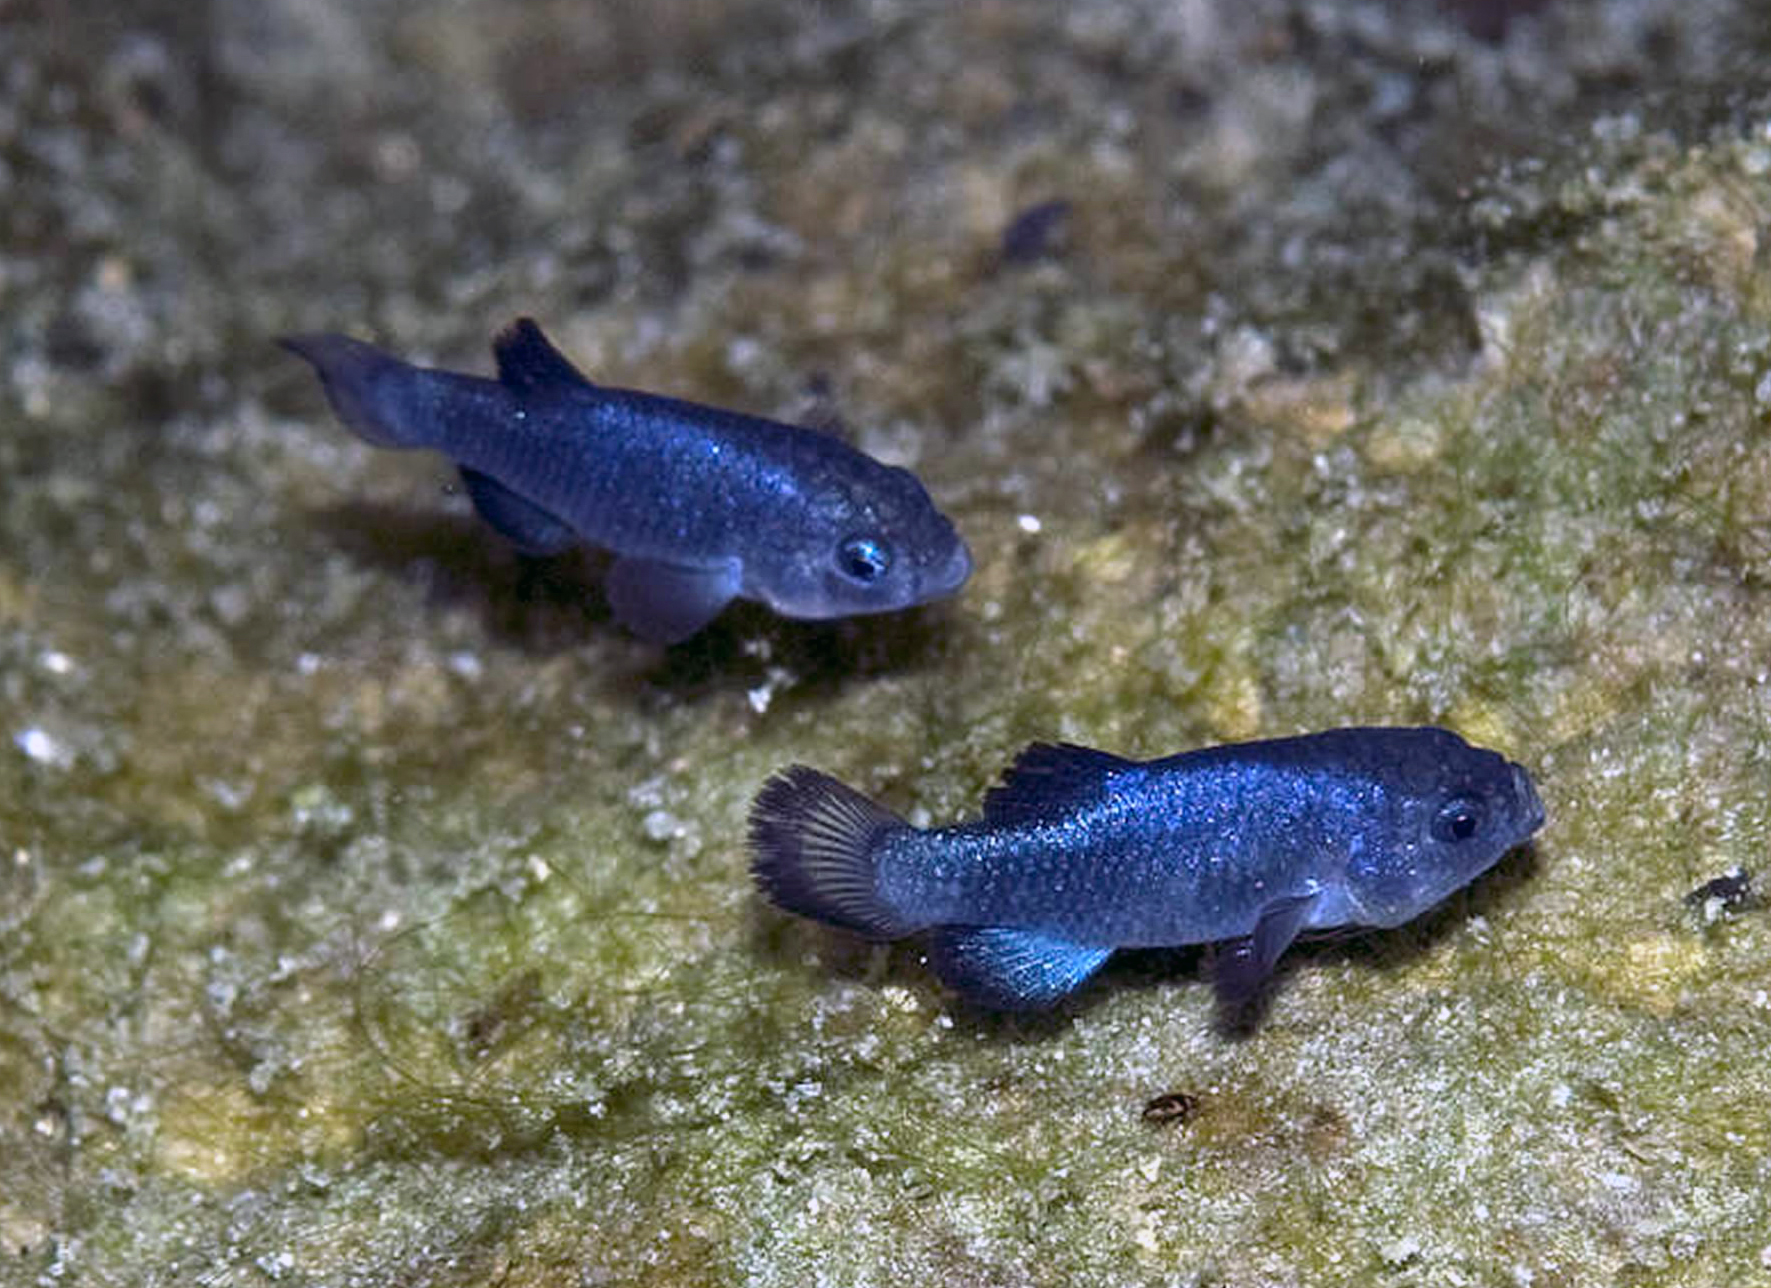 Cyprinodon diabolis males How An Earthquake In Mexico Affected The Worlds Rarest Fish A Thousand Miles Away